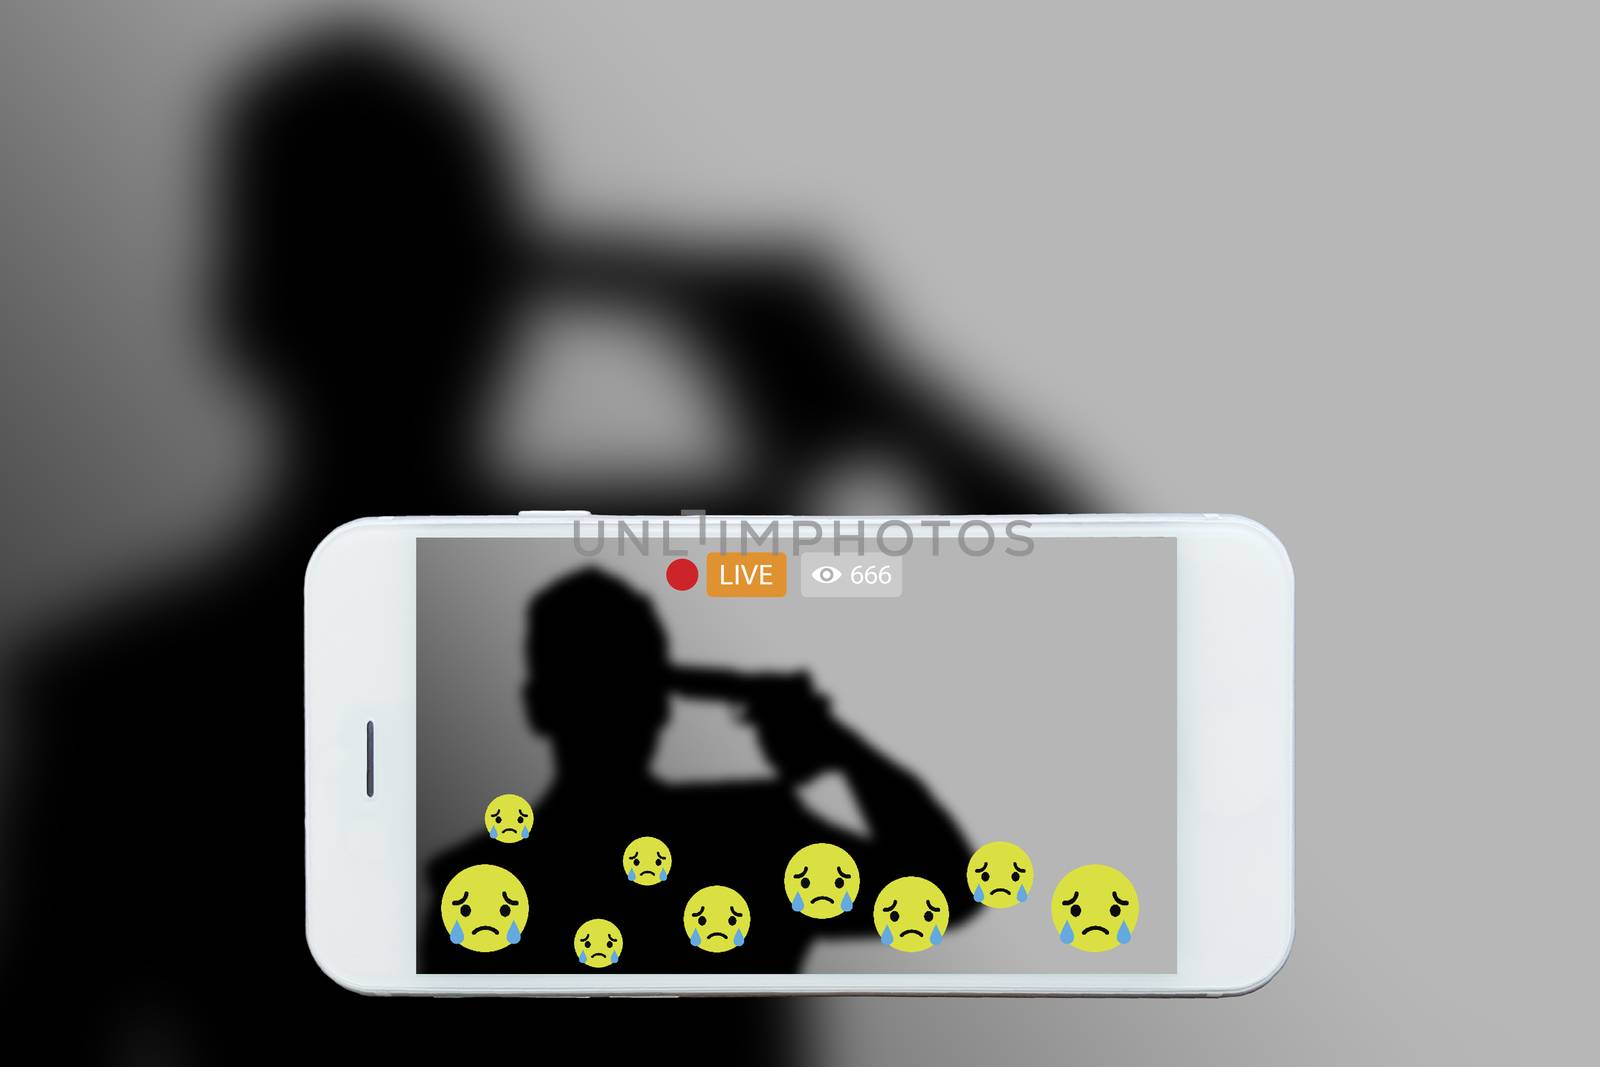 Problem of using social networks with wrong purpose effect concept:silhouette of man holding gun in hand stream his commits suicide stream live on social media. Crime ,violence within social networks.